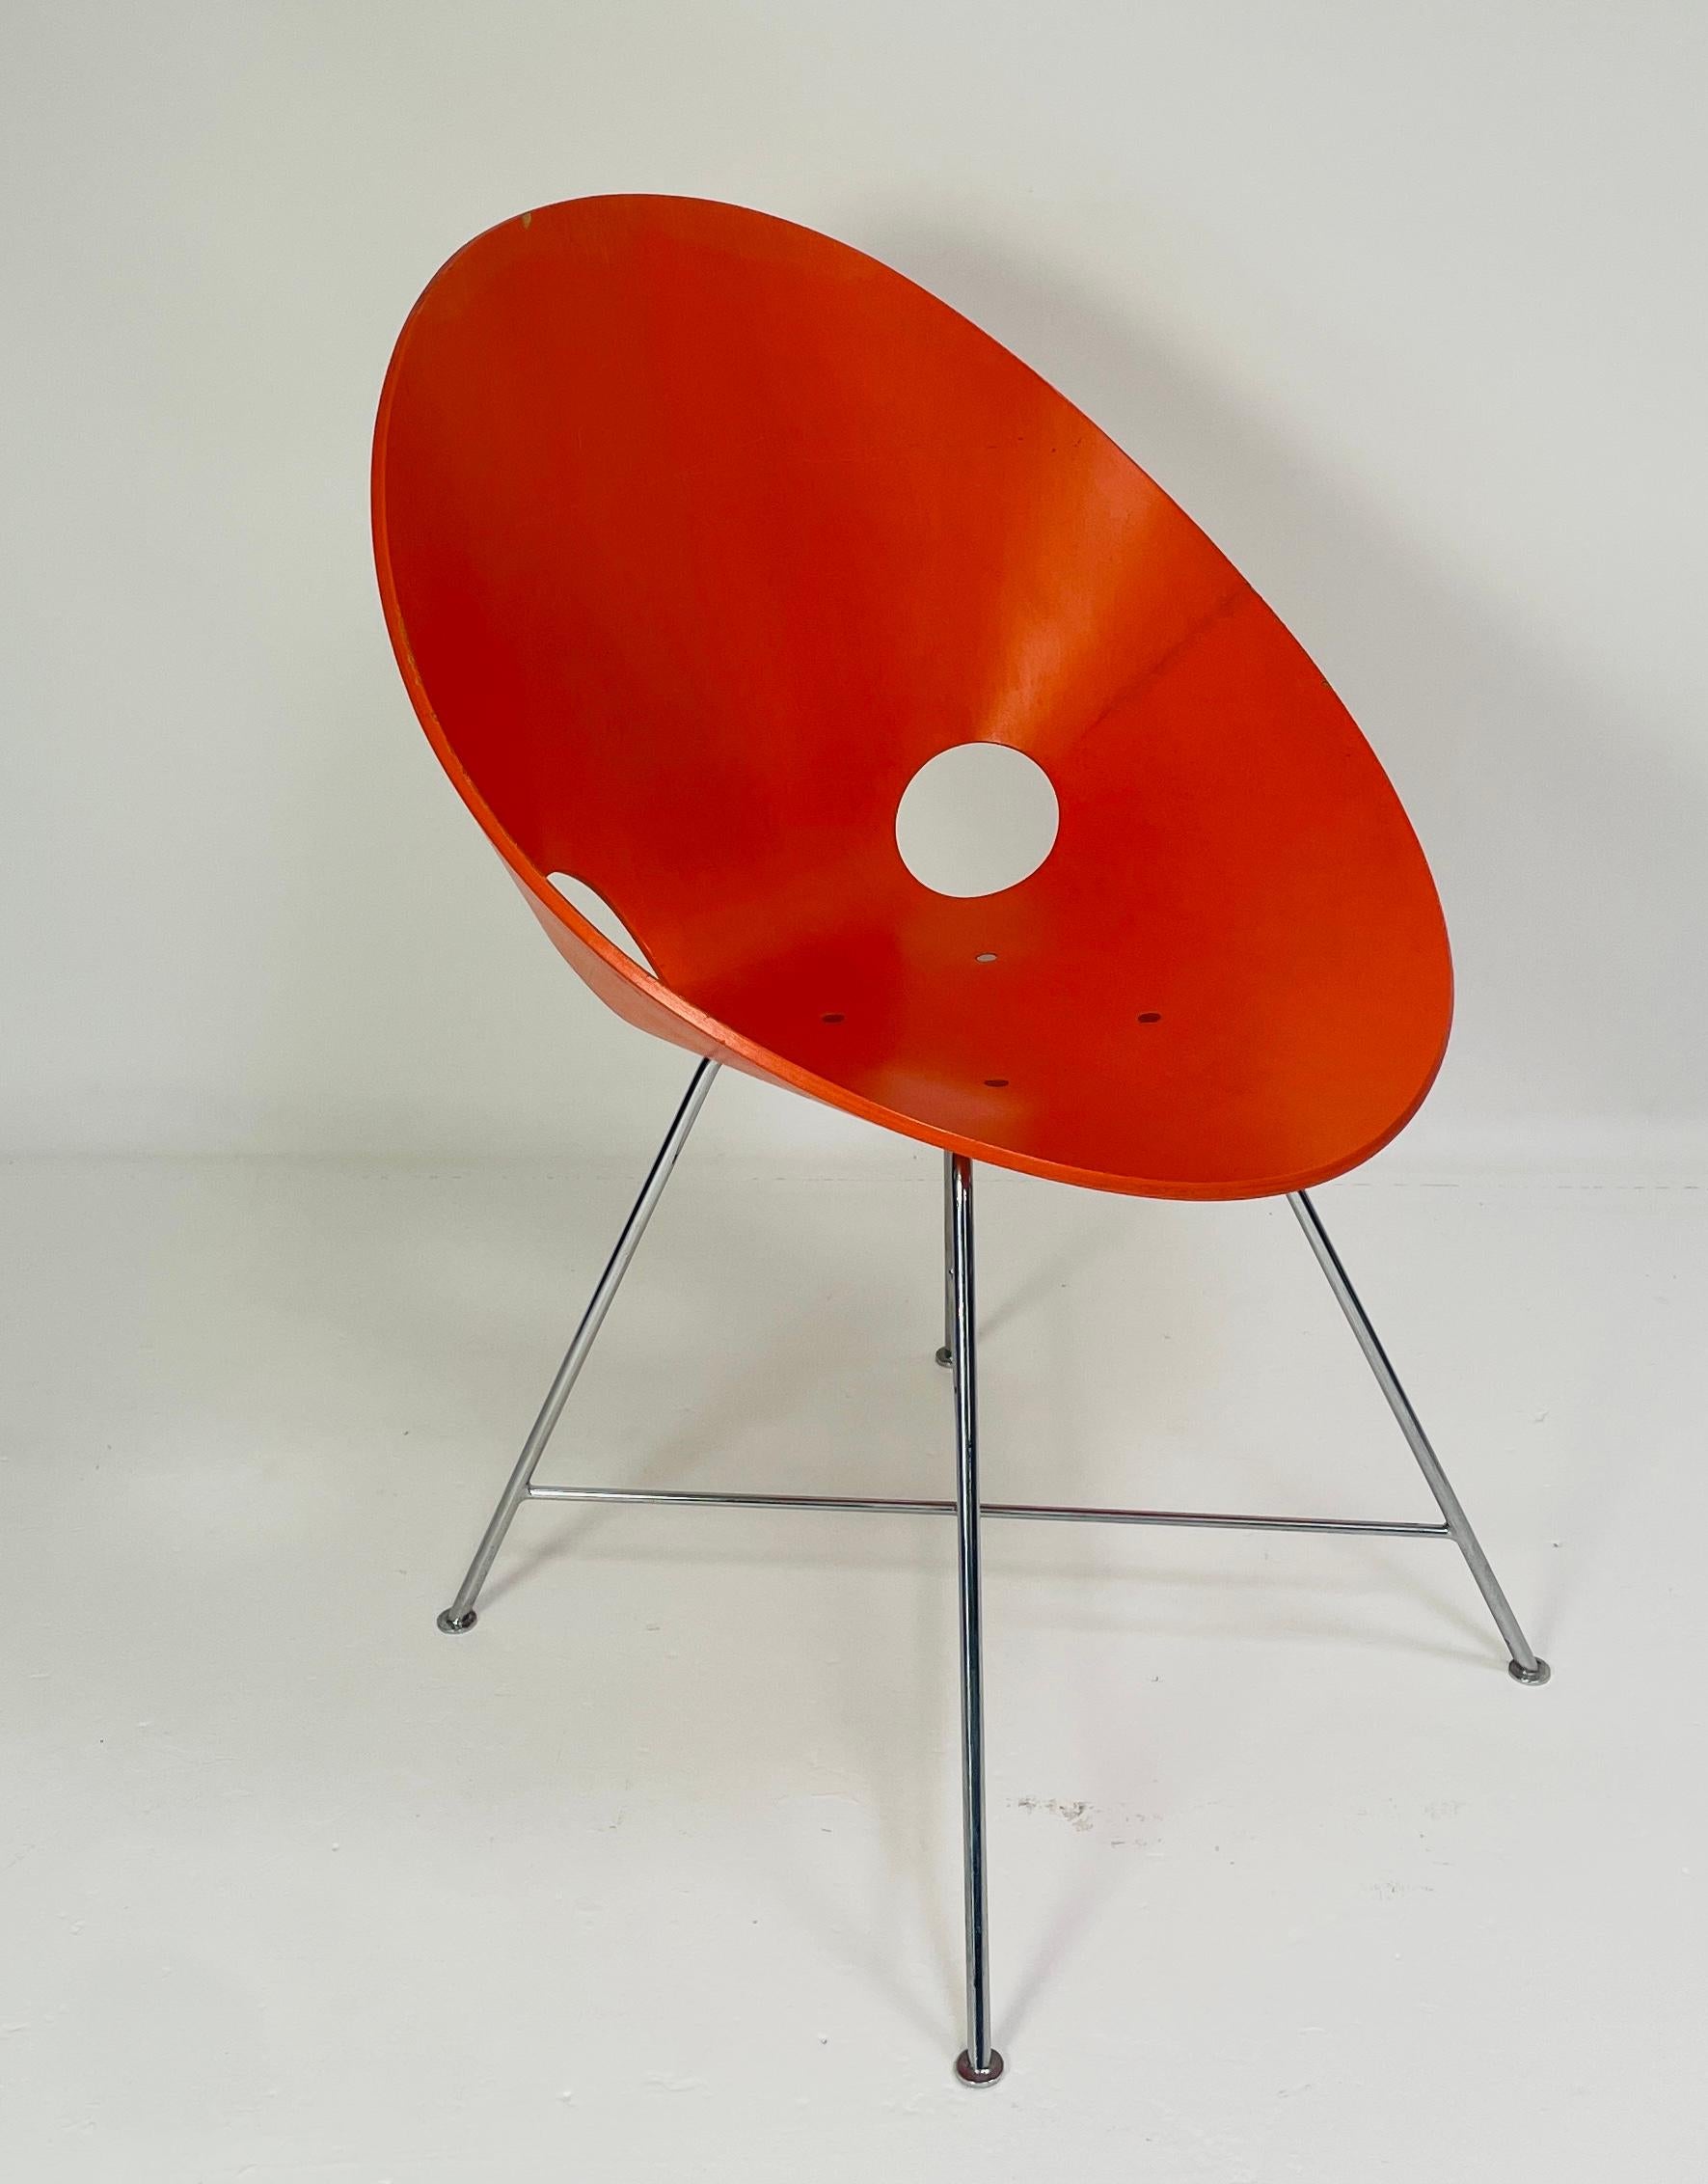 The ST 664 chair designed by Eddie Harlis in 1954. Thonet manufactured the chairs in Germany. These chairs are no longer produced. The chair has an orange painted finish and are made from bent plywood (beech). The legs are chromed steel. In good